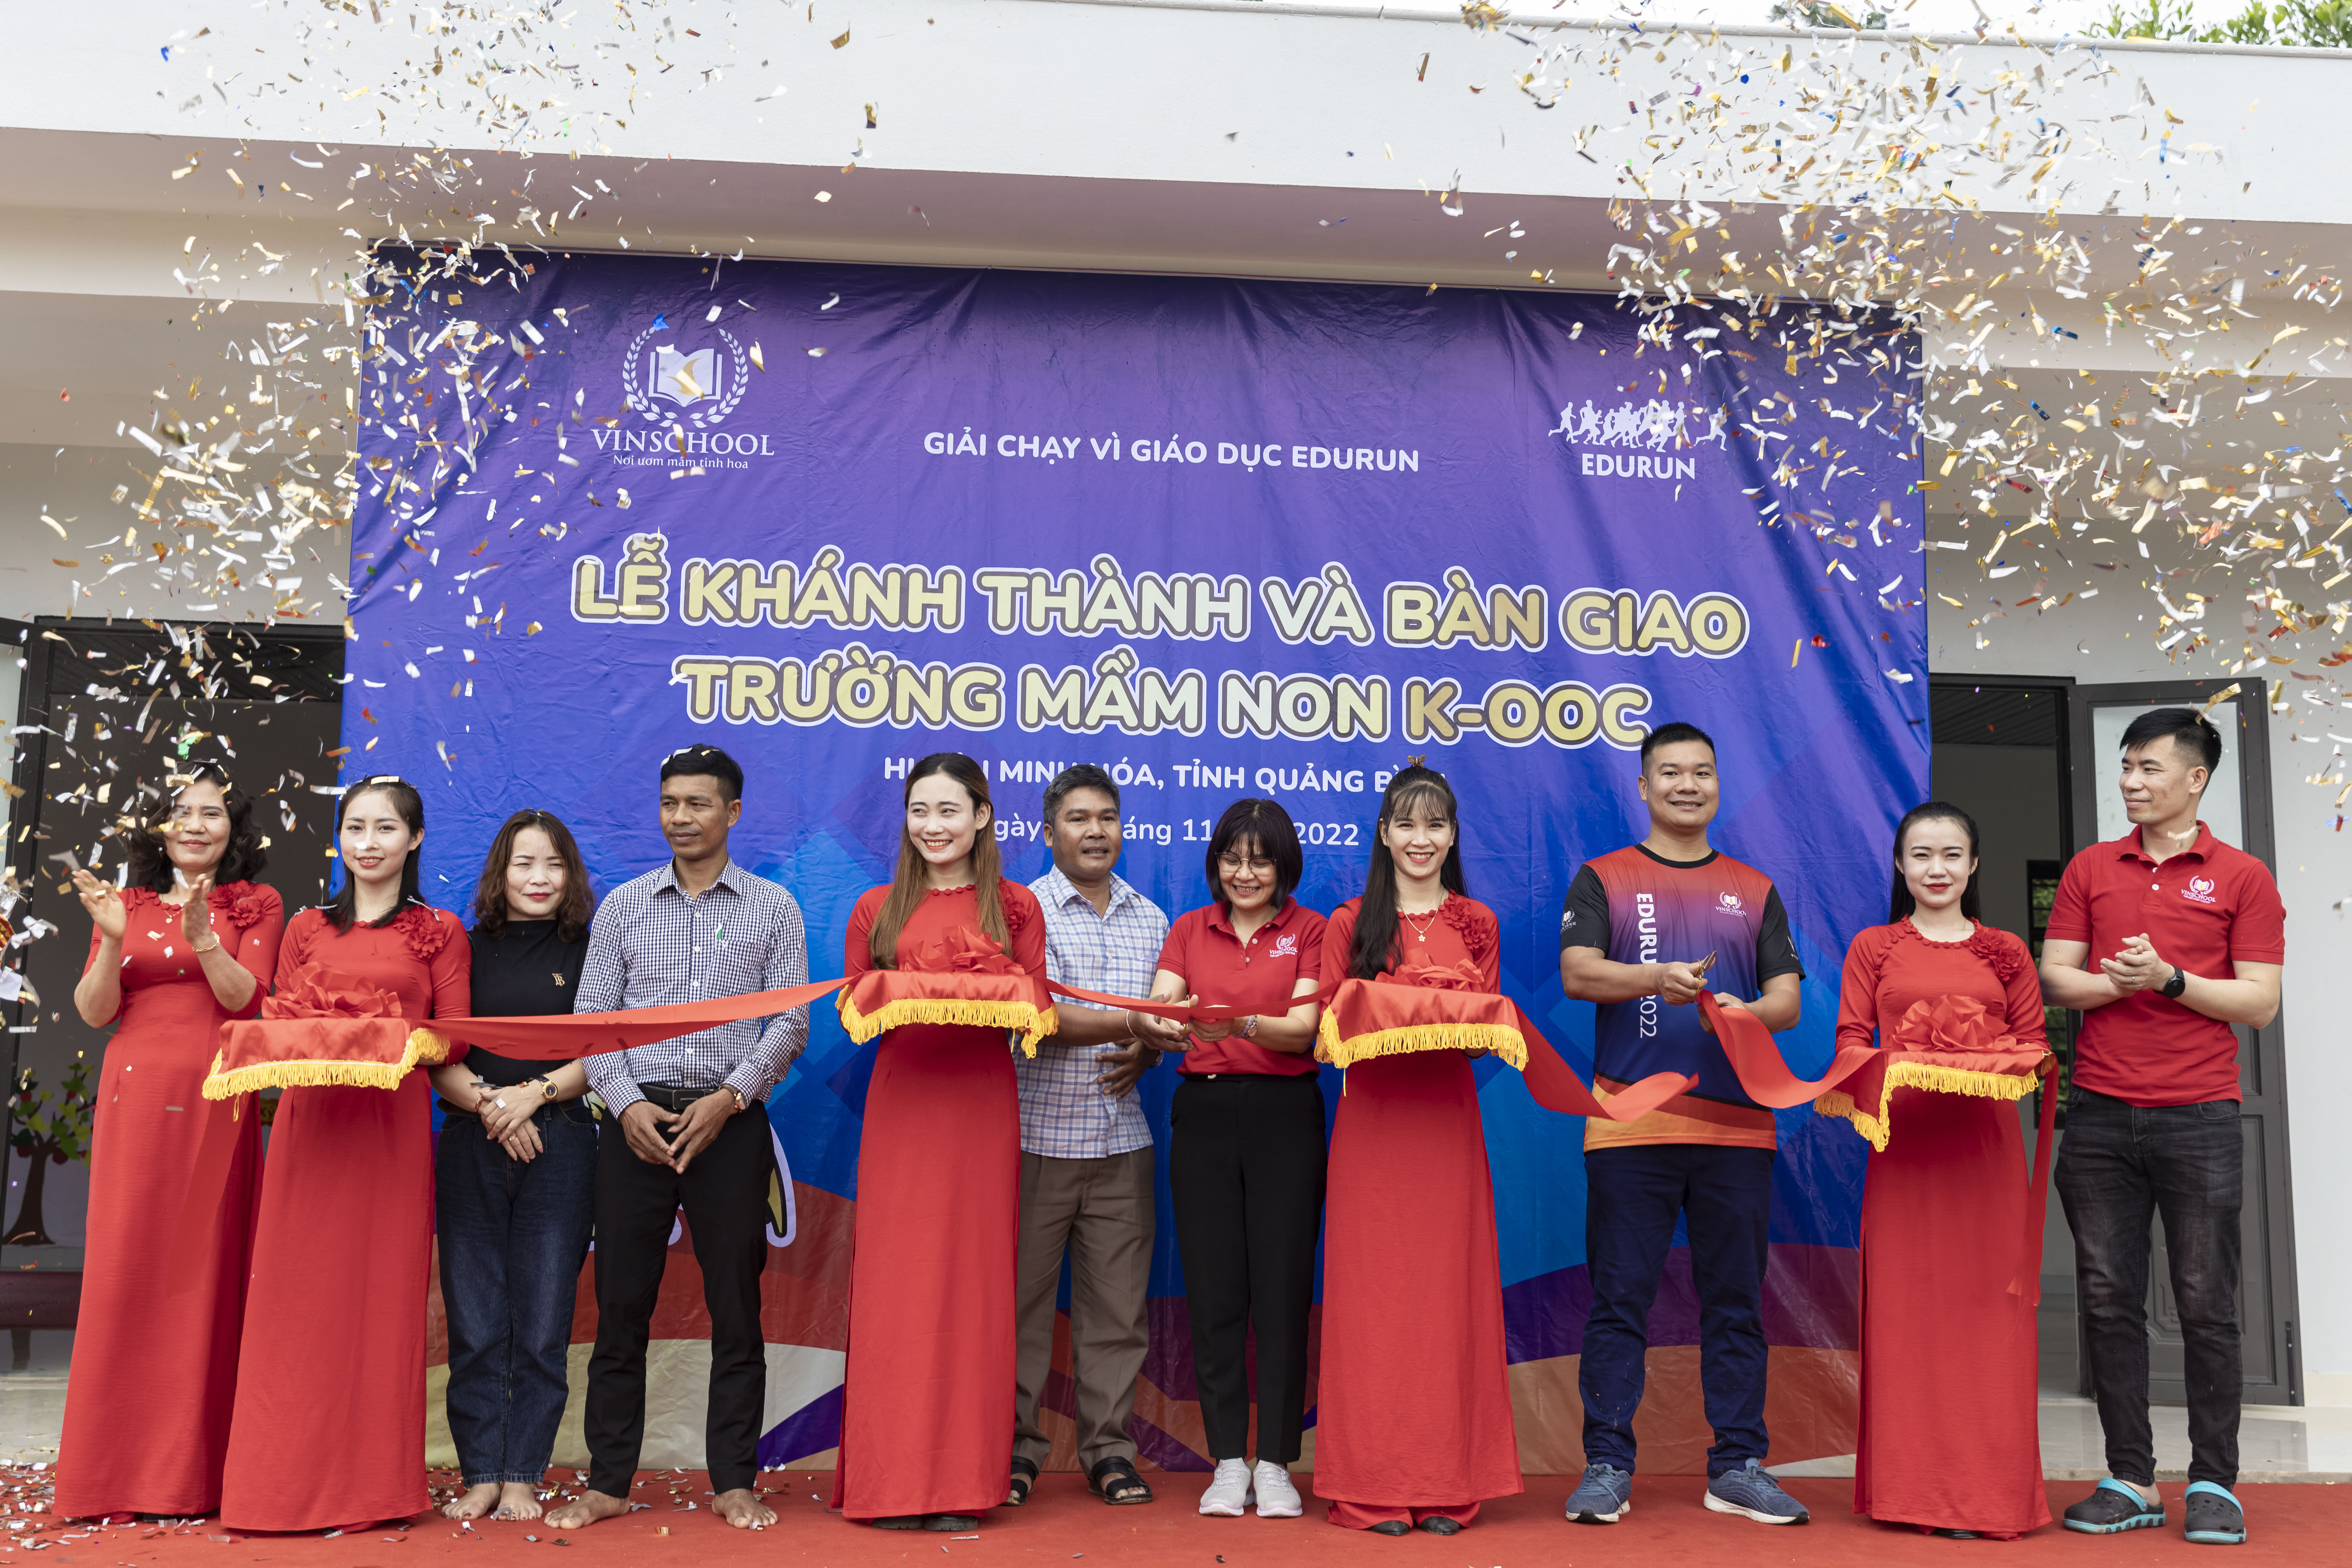 EDURUN provides underprivileged children in Quang Binh with educational opportunities